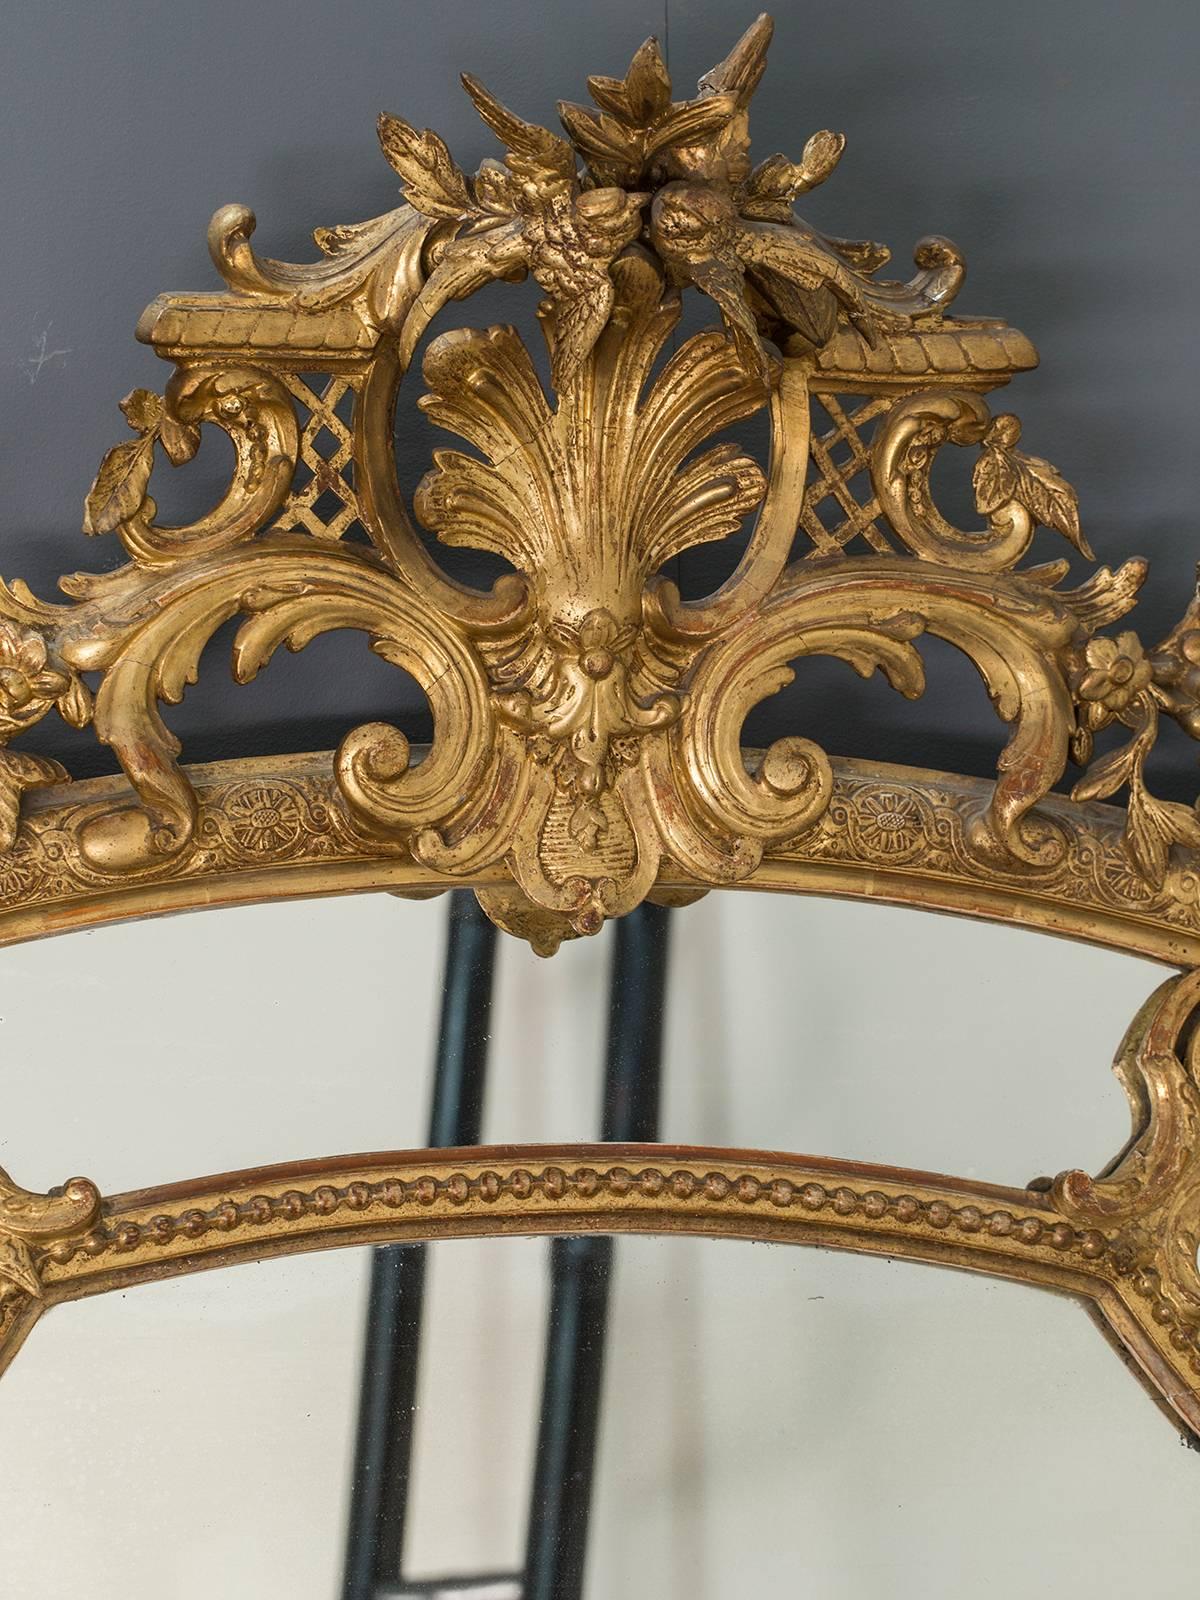 Be the first to see our new listings direct from 1stdibs! Please click "Follow" below.

This marvelous antique French pareclose mirror circa 1890 is known as a "Glace des Mariages" because of the pair of doves seen at the top